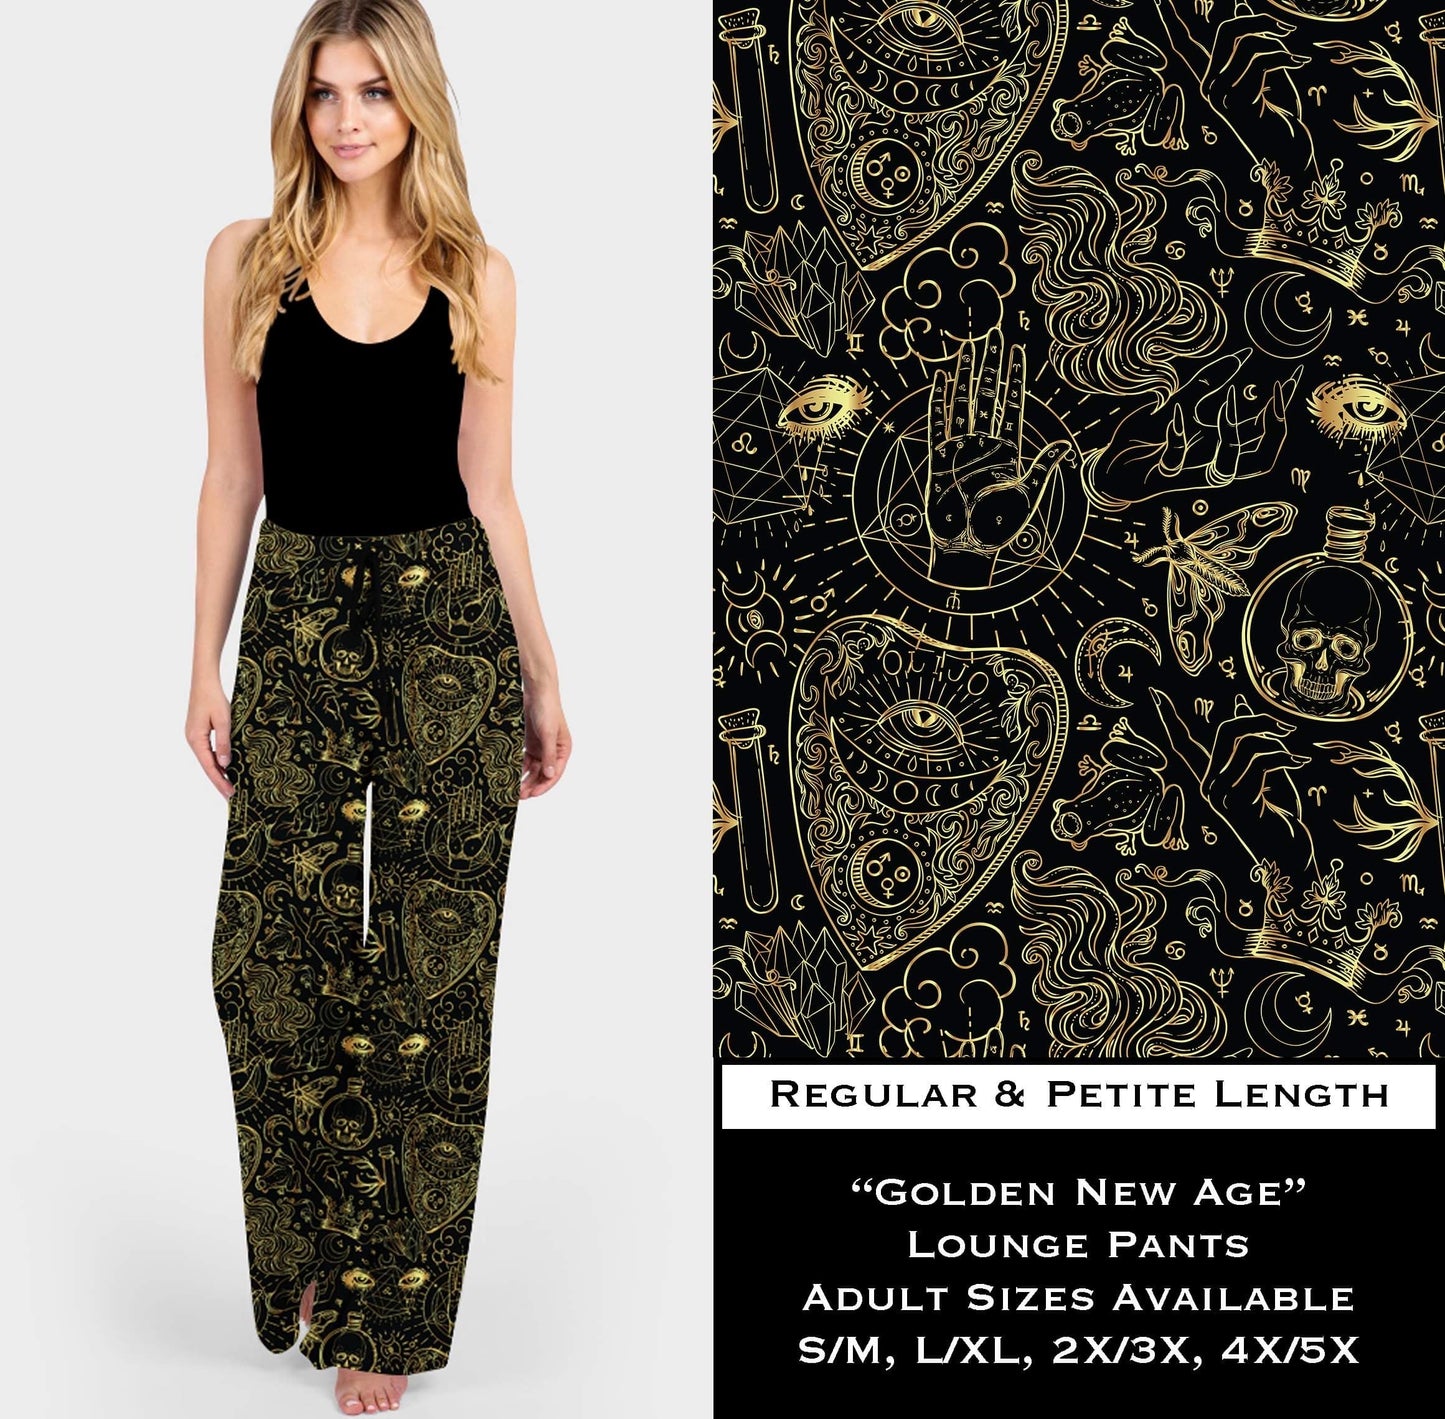 Golden New Age Lounge Pants